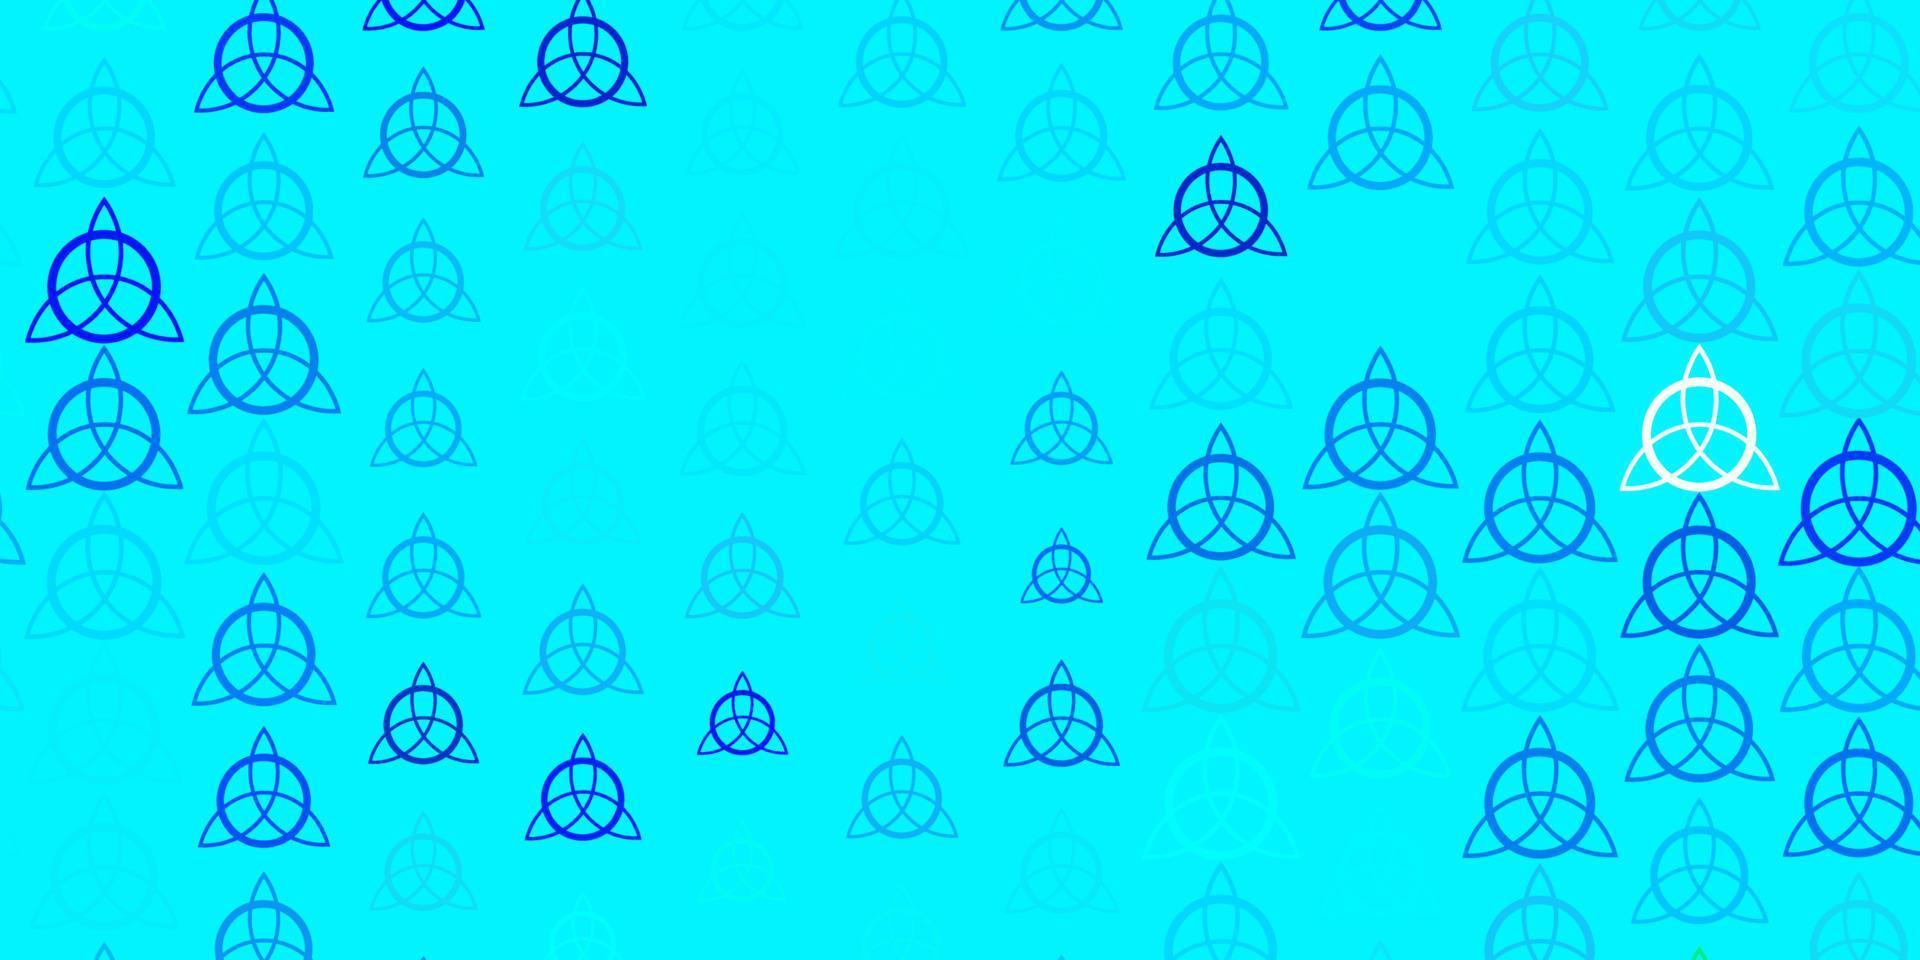 Light Blue, Green vector background with occult symbols.